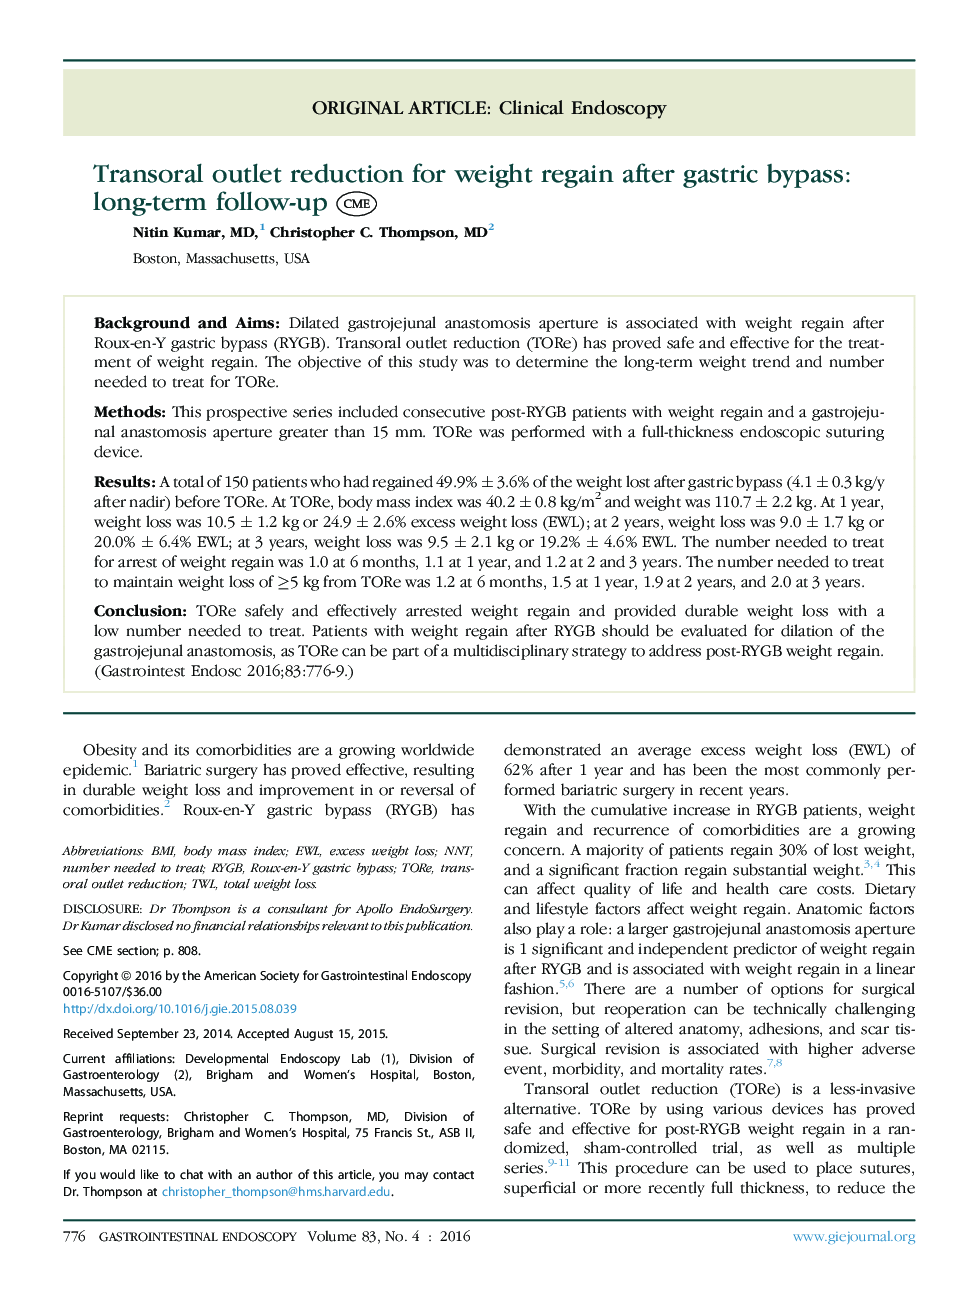 Transoral outlet reduction for weight regain after gastric bypass: long-term follow-up 